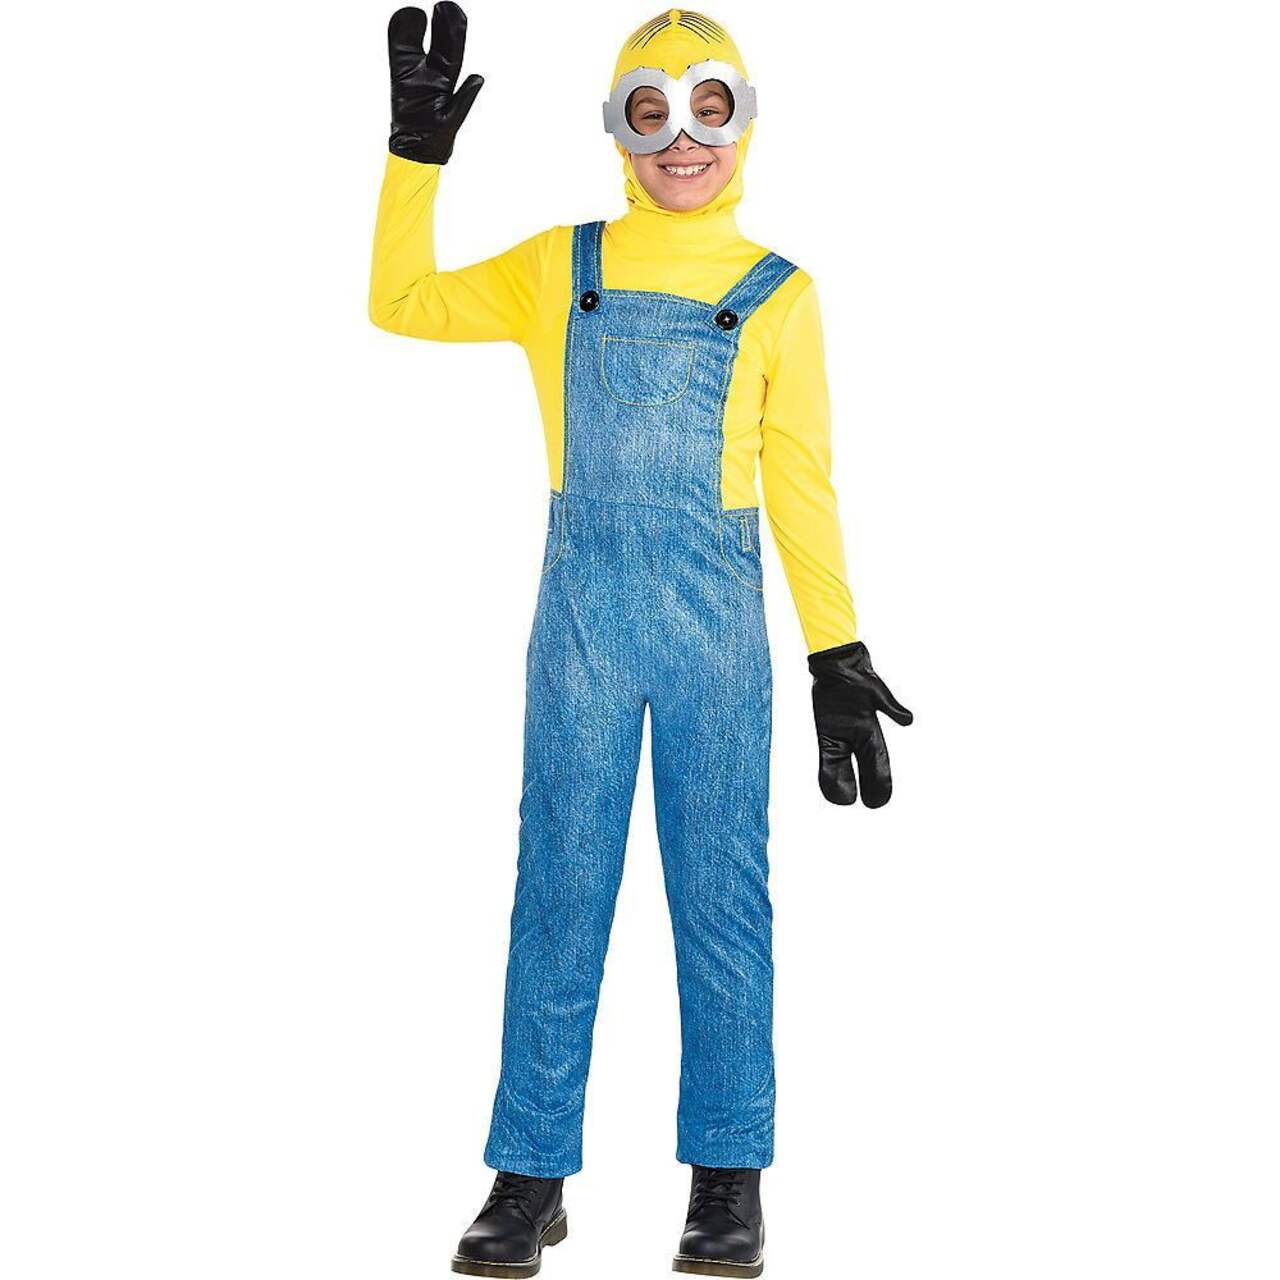 Toddler & Kids' Despicable Me Minion Yellow/Blue Jumpsuit with